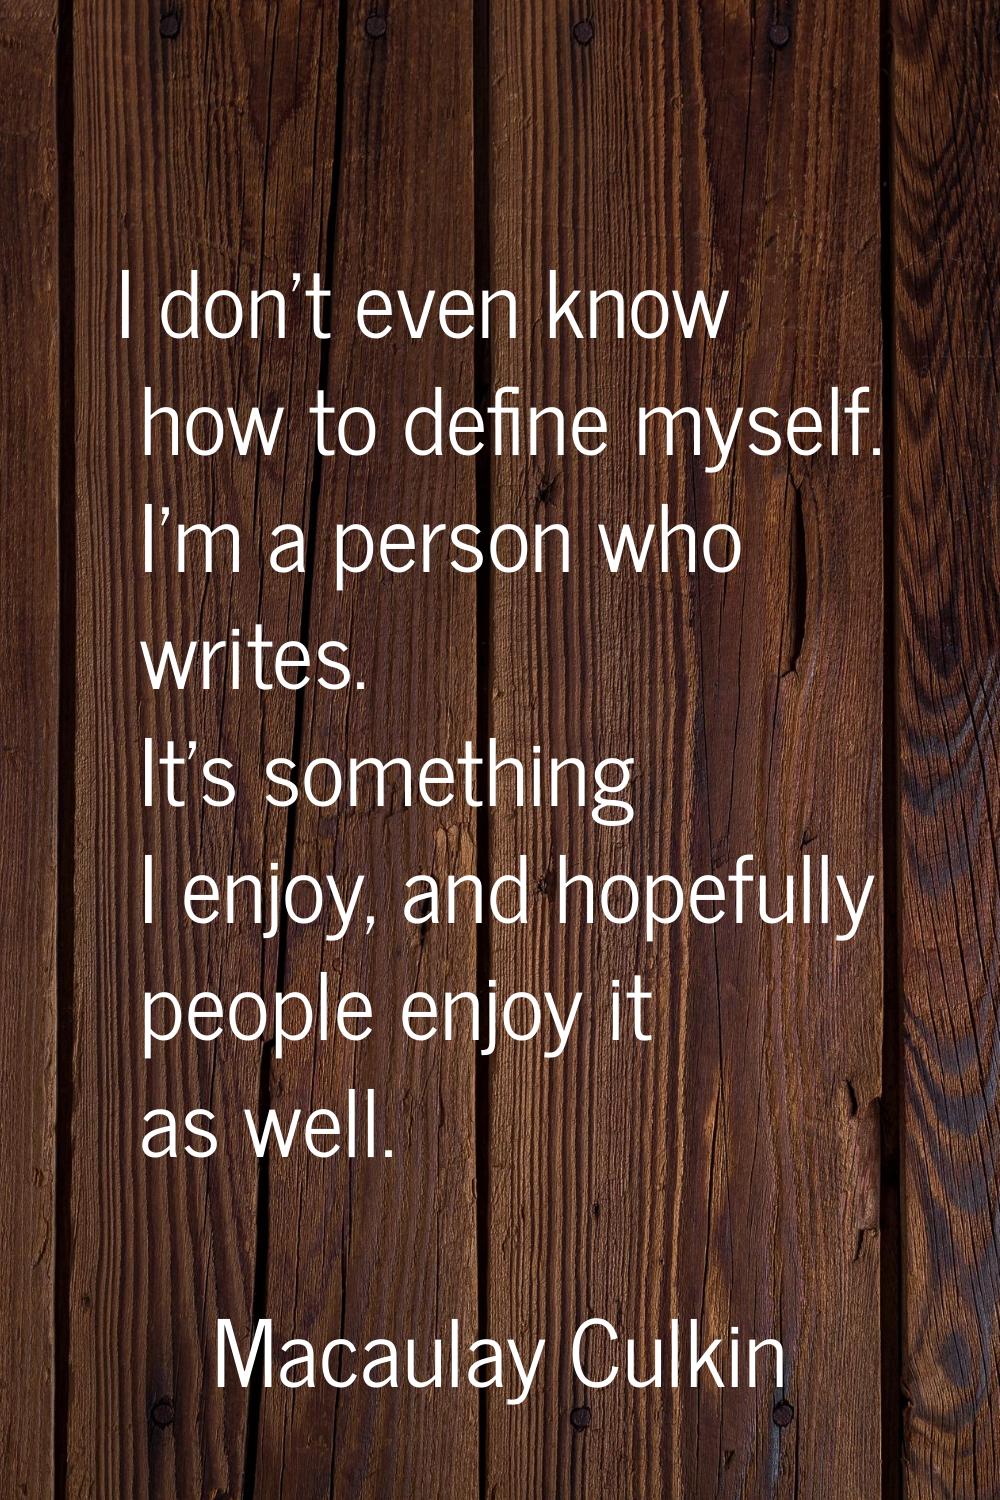 I don't even know how to define myself. I'm a person who writes. It's something I enjoy, and hopefu